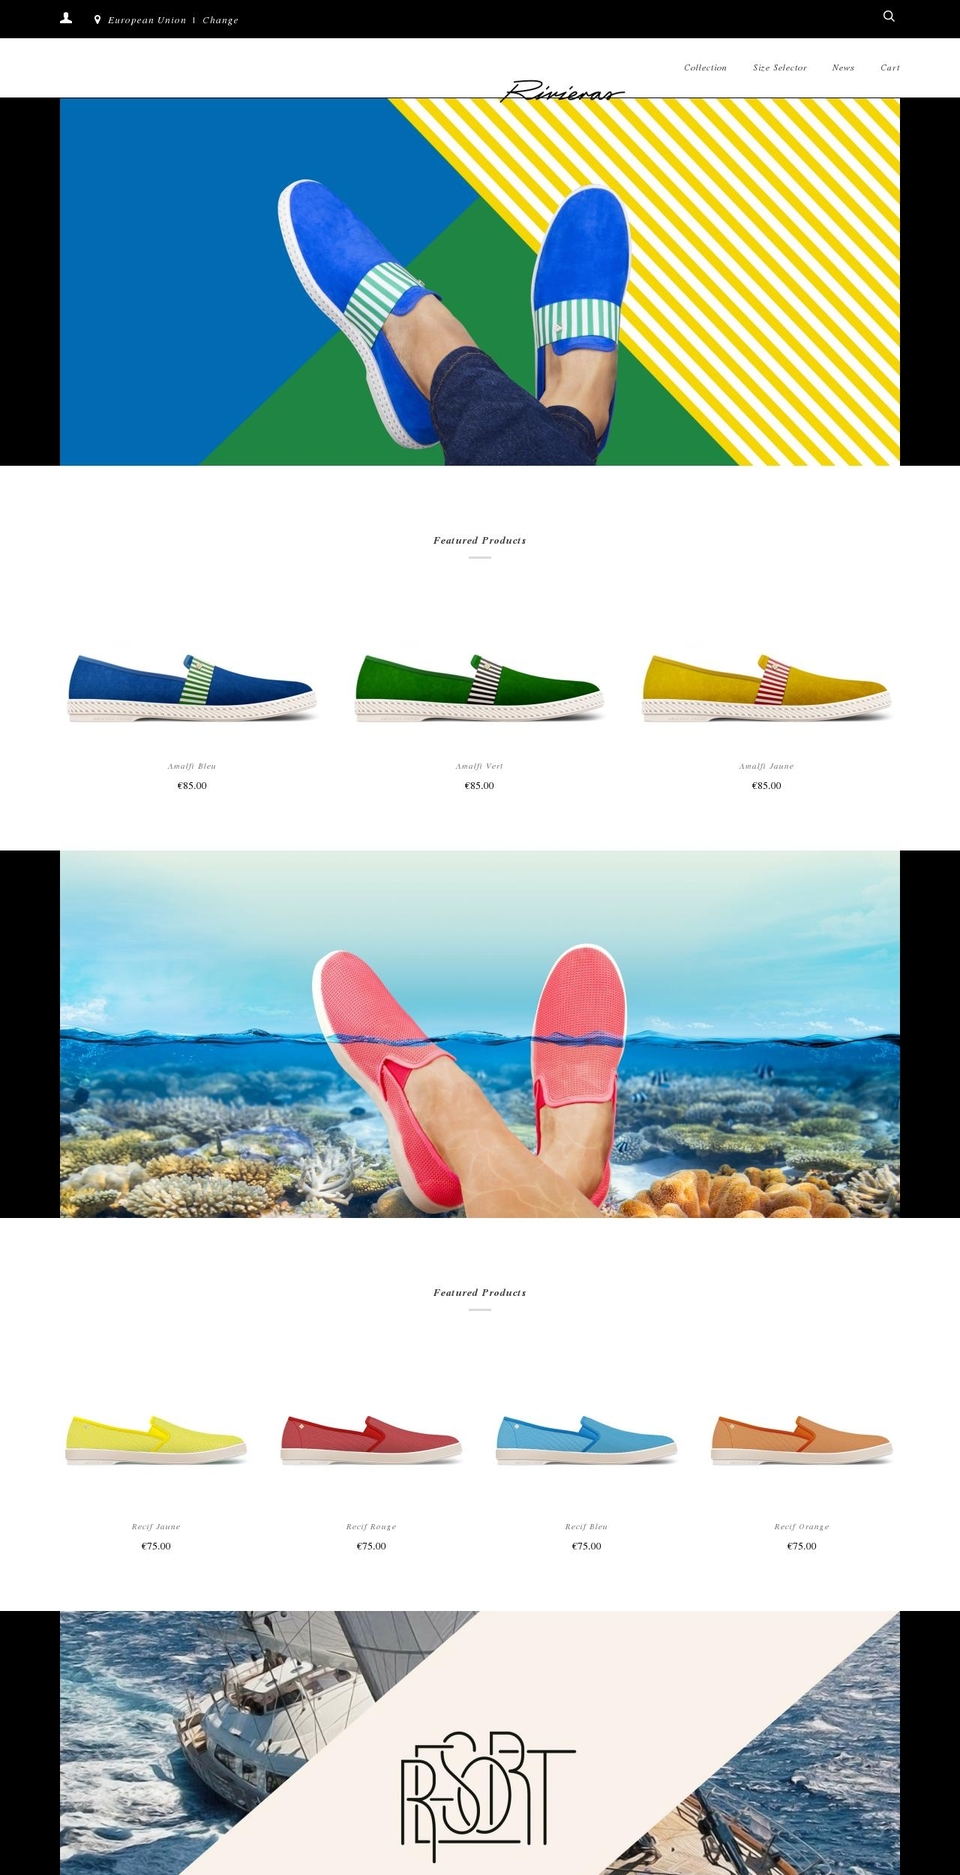 Rivieras [Plus]-TH-July-30-2018 Shopify theme site example leisure-shoes.com